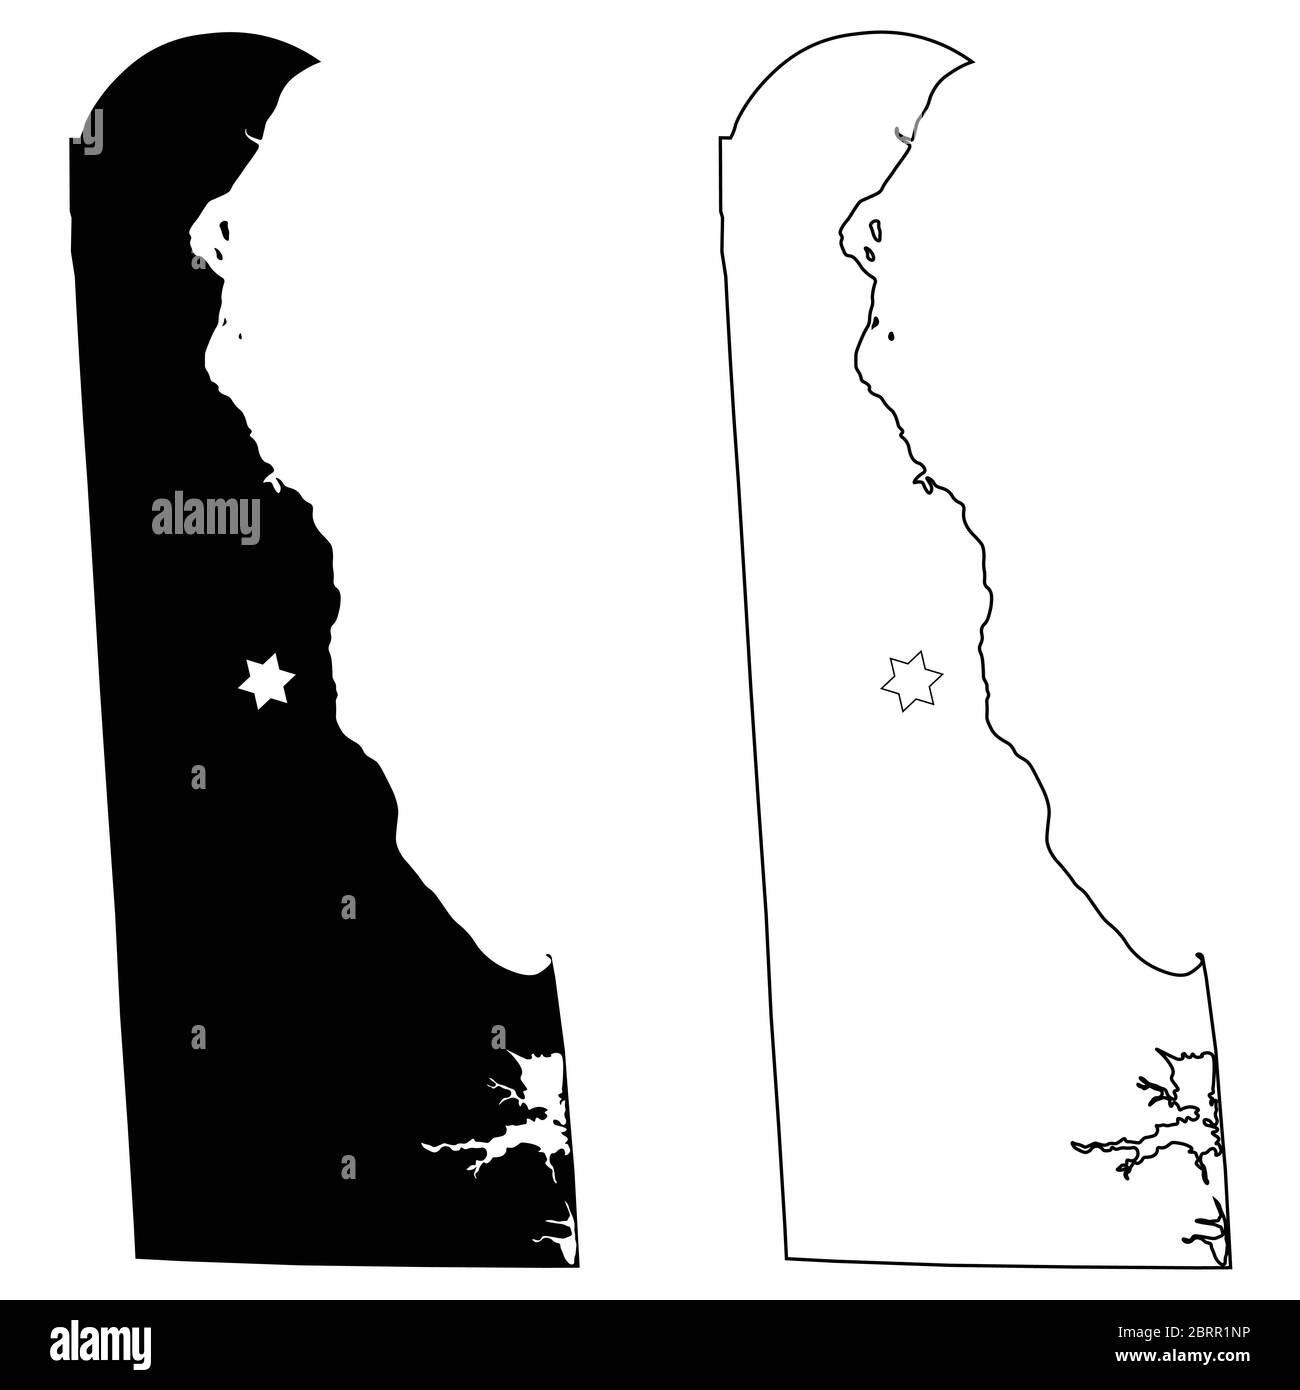 Delaware DE state Maps USA with Capital City Star at Dover. Black silhouette and outline isolated on a white background. EPS Vector Stock Vector